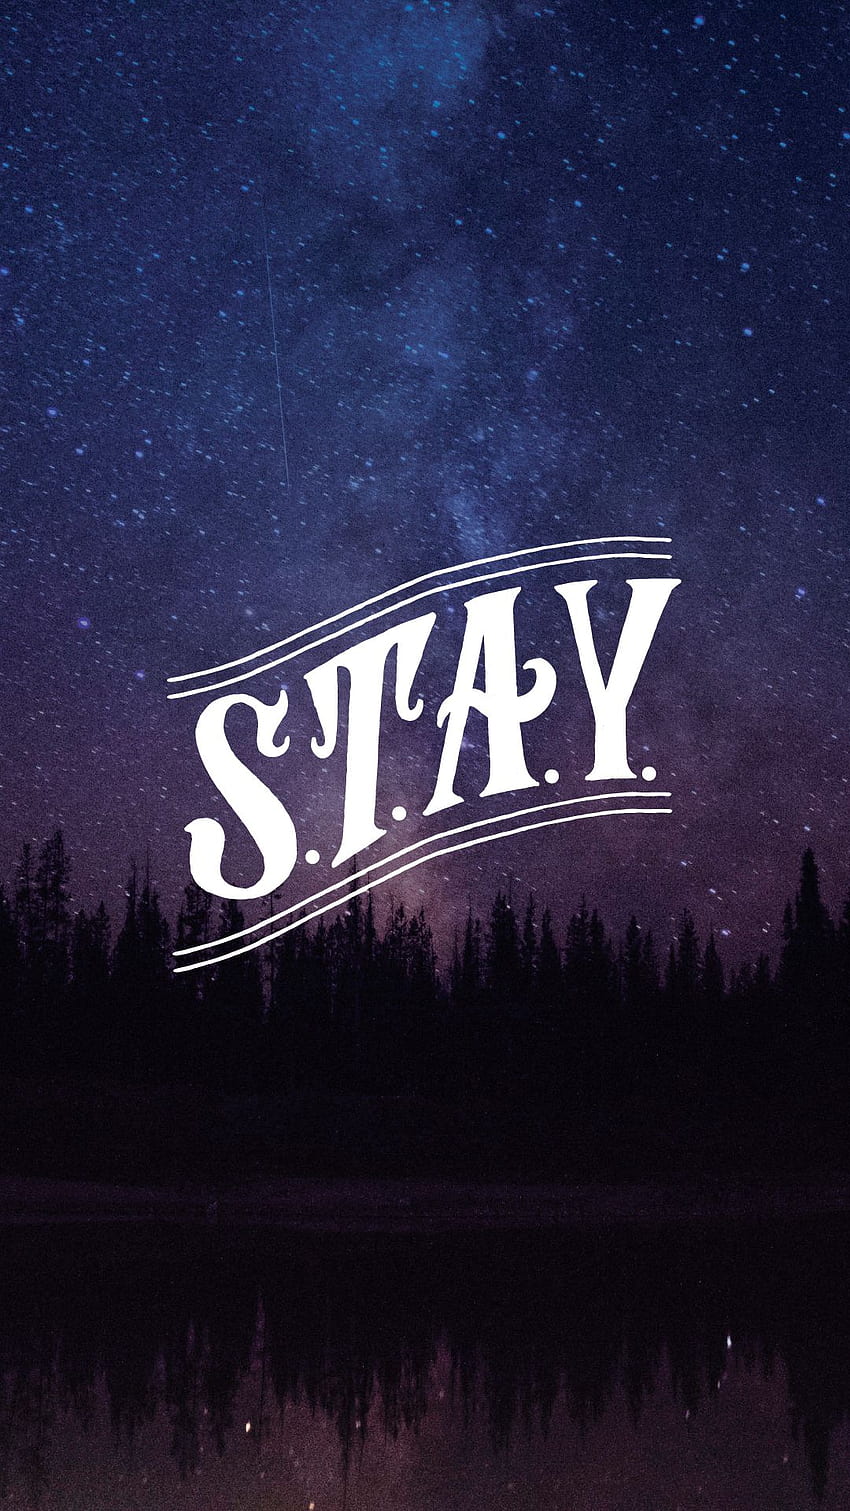 S.T.A.Y. – A Piece Inspired by the Music from the Film “Interstellar HD phone wallpaper